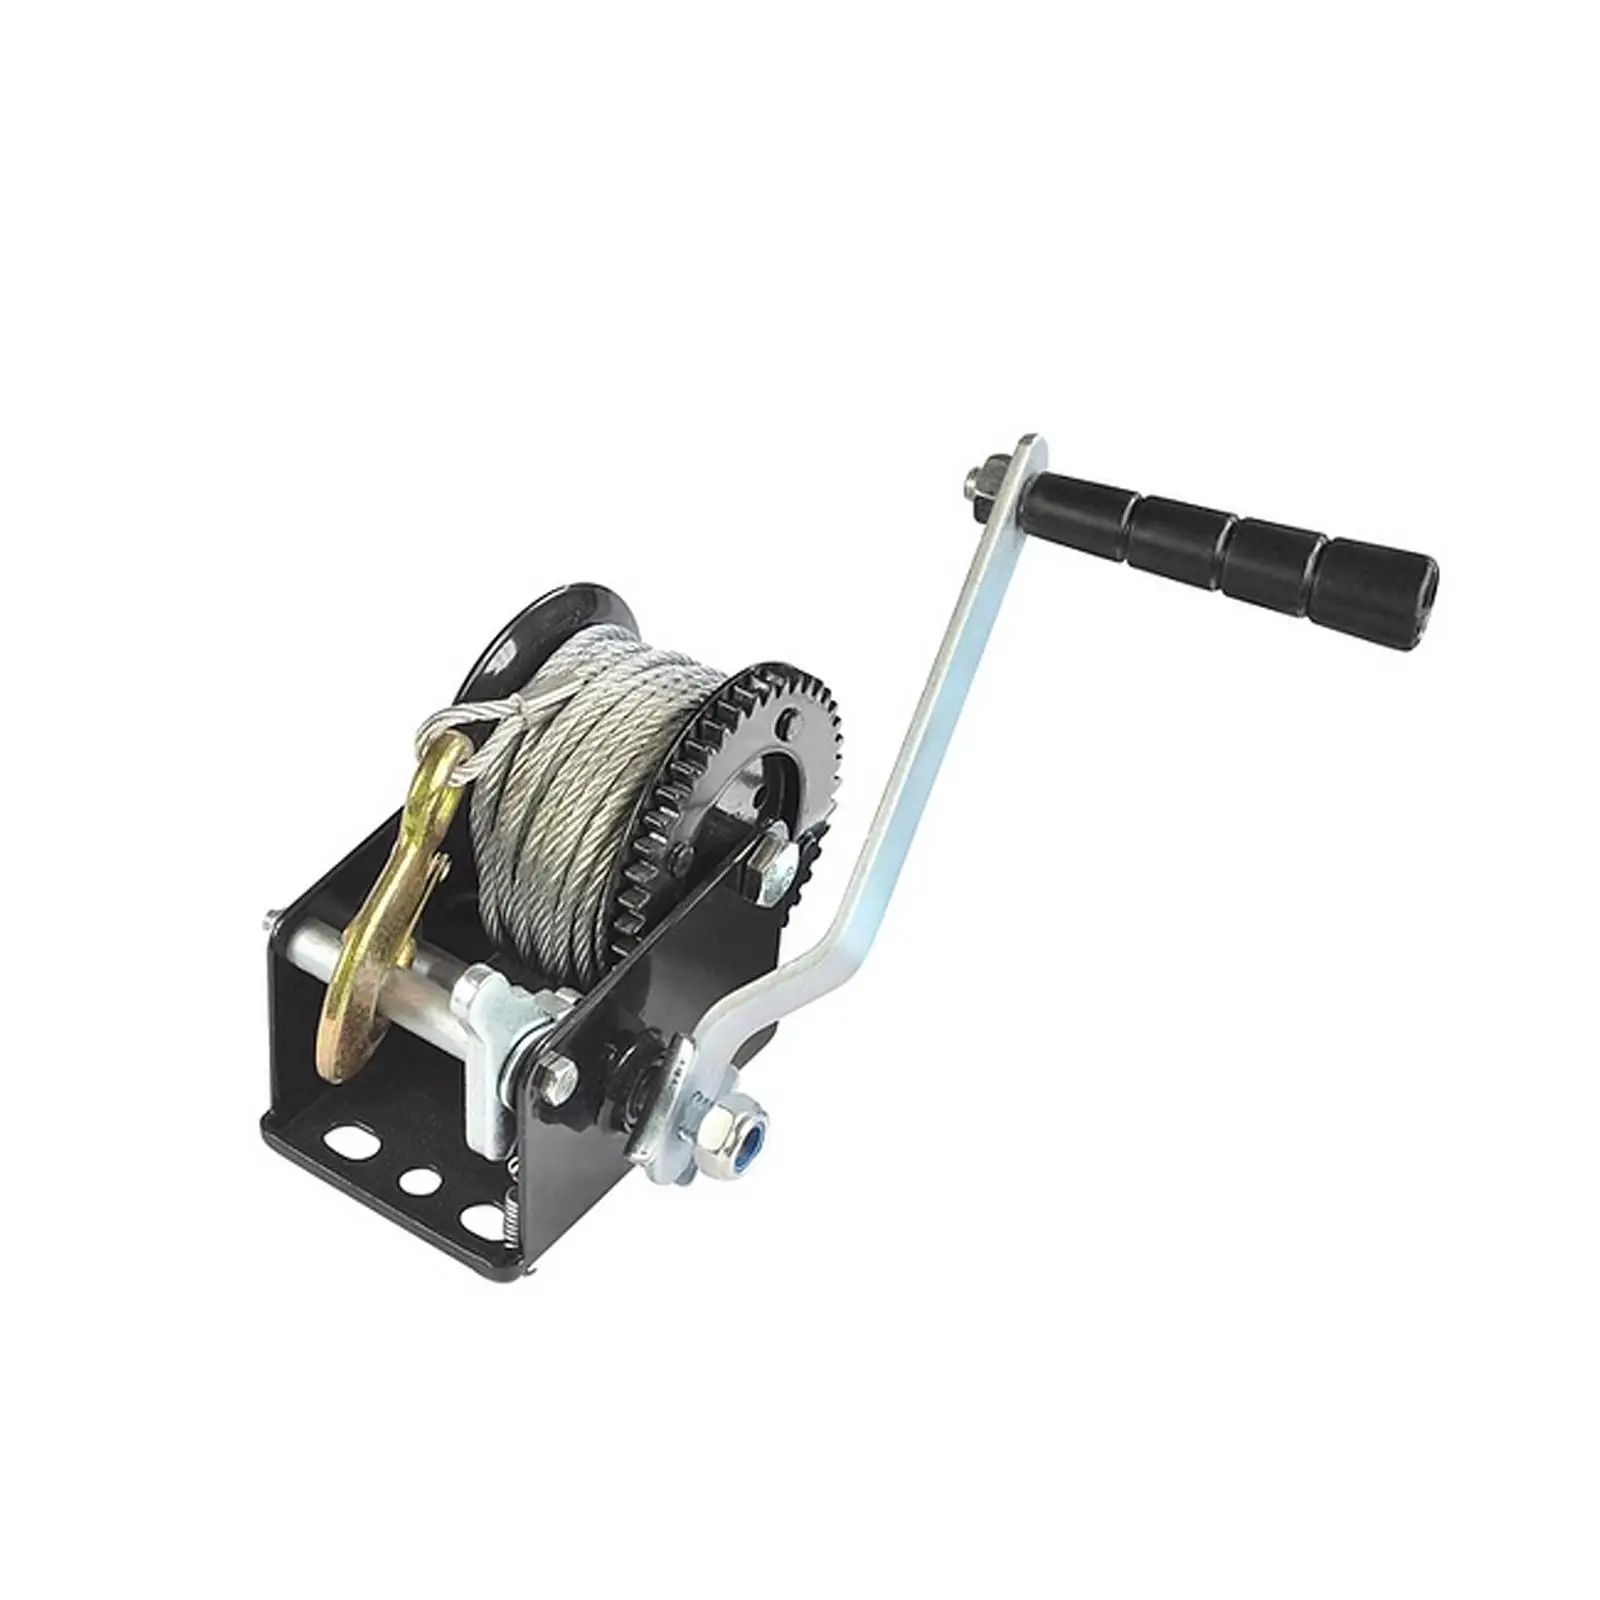 Manual Hand Winch 800lbs Spare Parts Replacement Components Fittings Simple to Use Cable Trailer Winch for Boat ATV Motorhomes